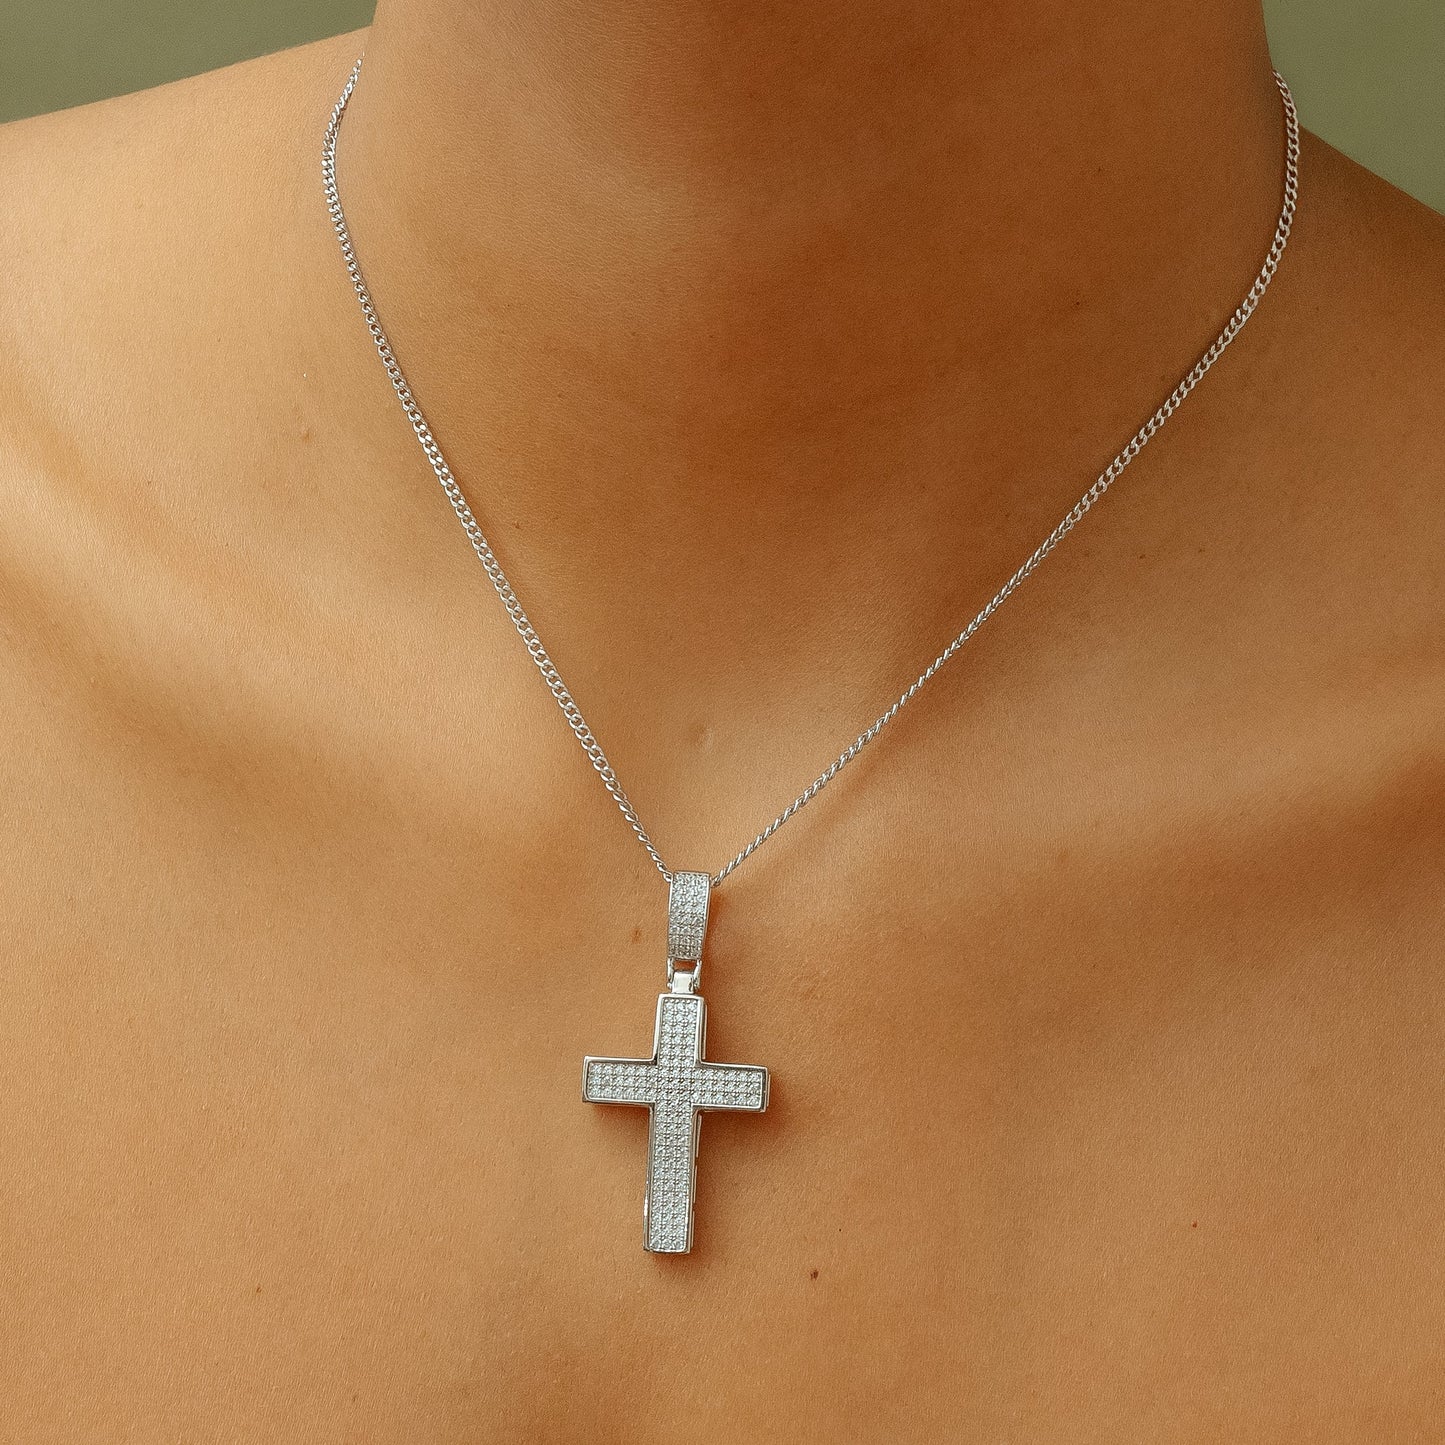 The Double Plated Iced Cross Pendant